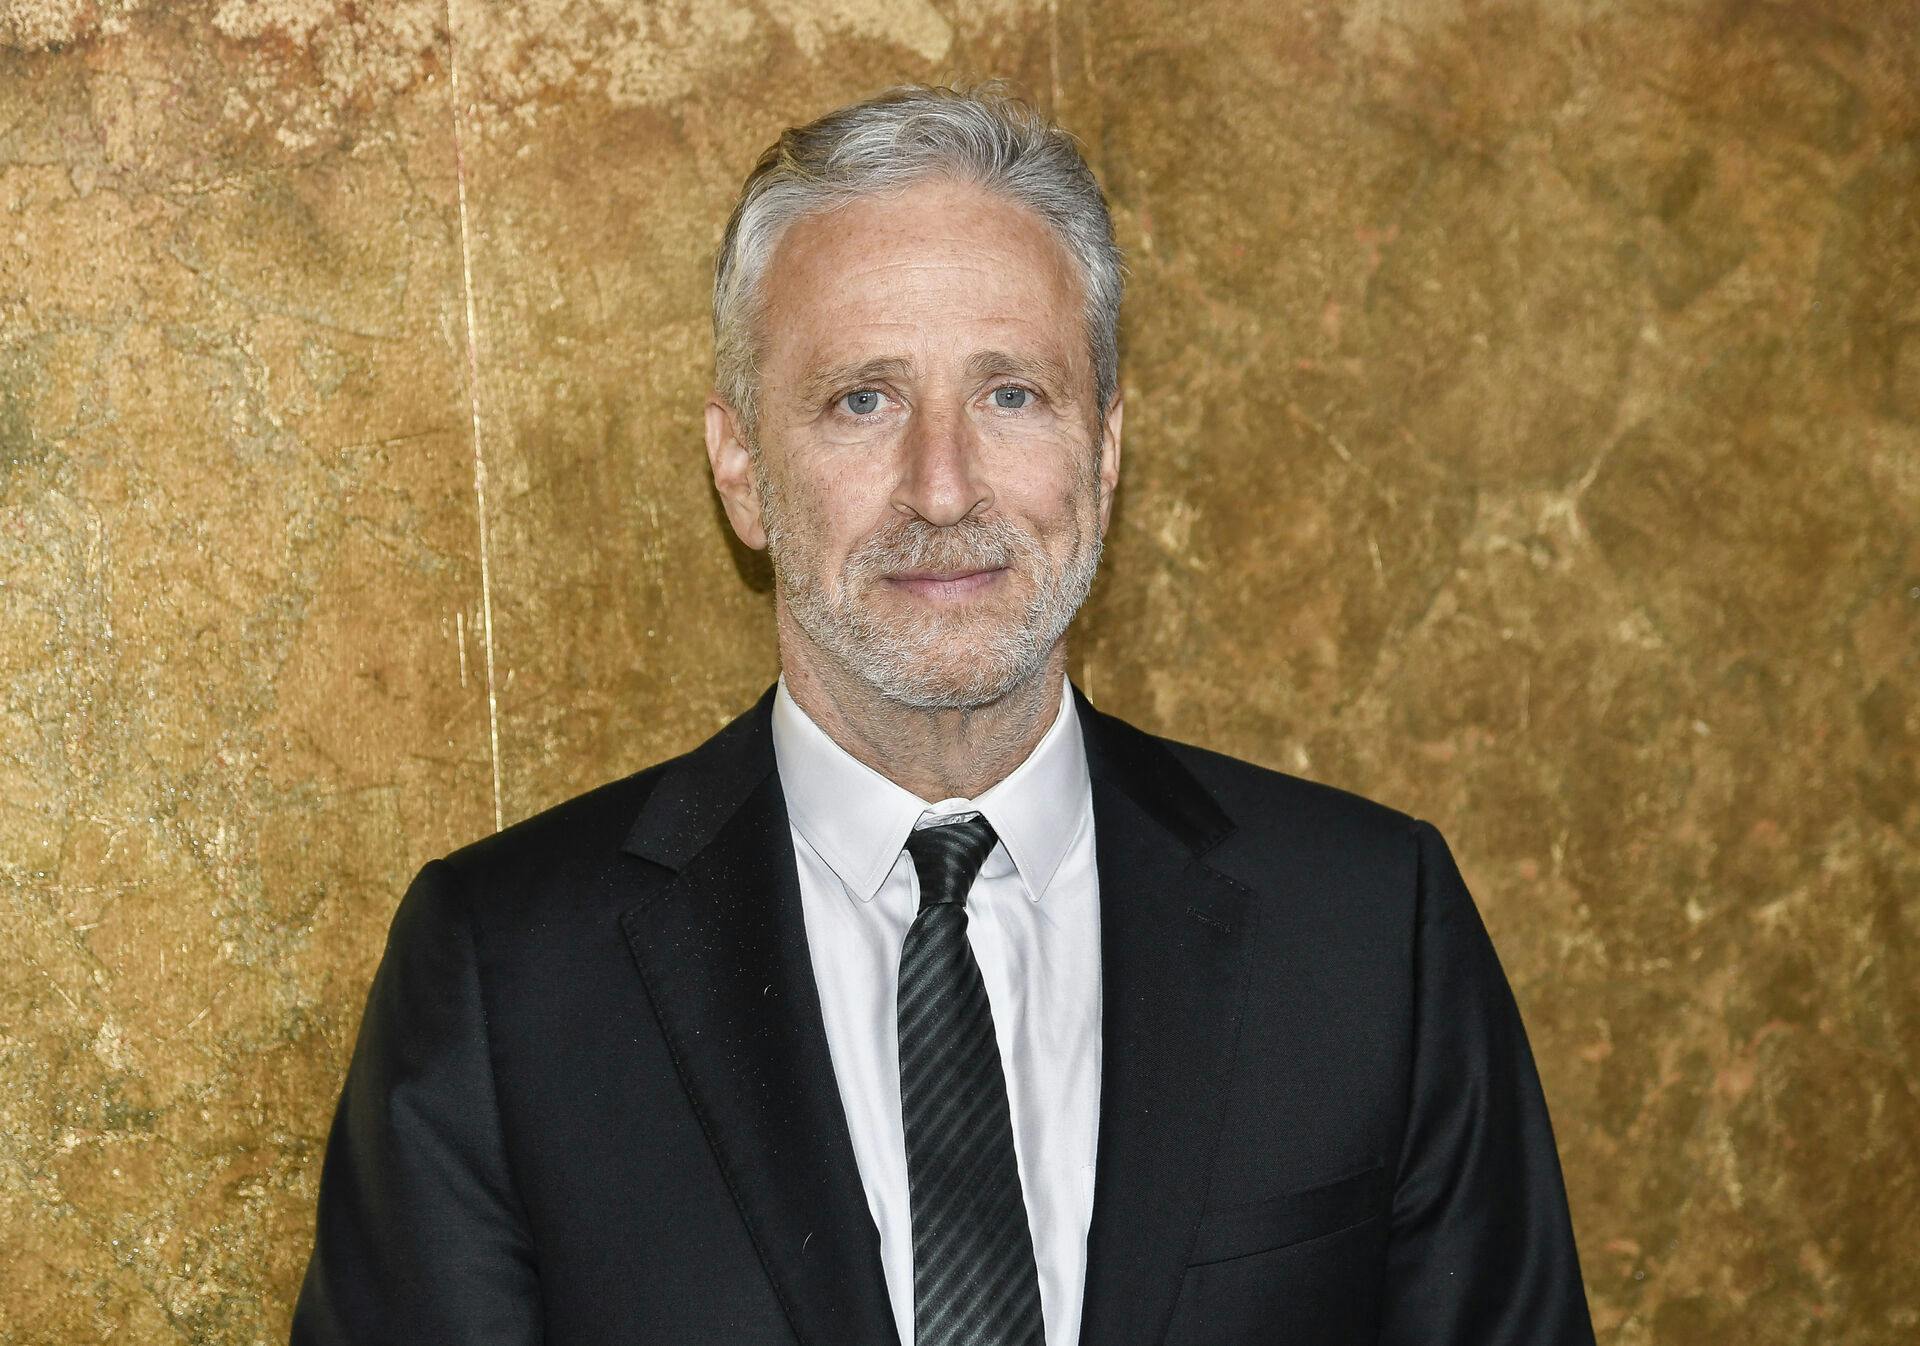 Jon Stewart attends The Albies hosted by the Clooney Foundation for Justice at the New York Public Library on Thursday, Sept. 28, 2023, in New York. (Photo by Evan Agostini/Invision/AP)